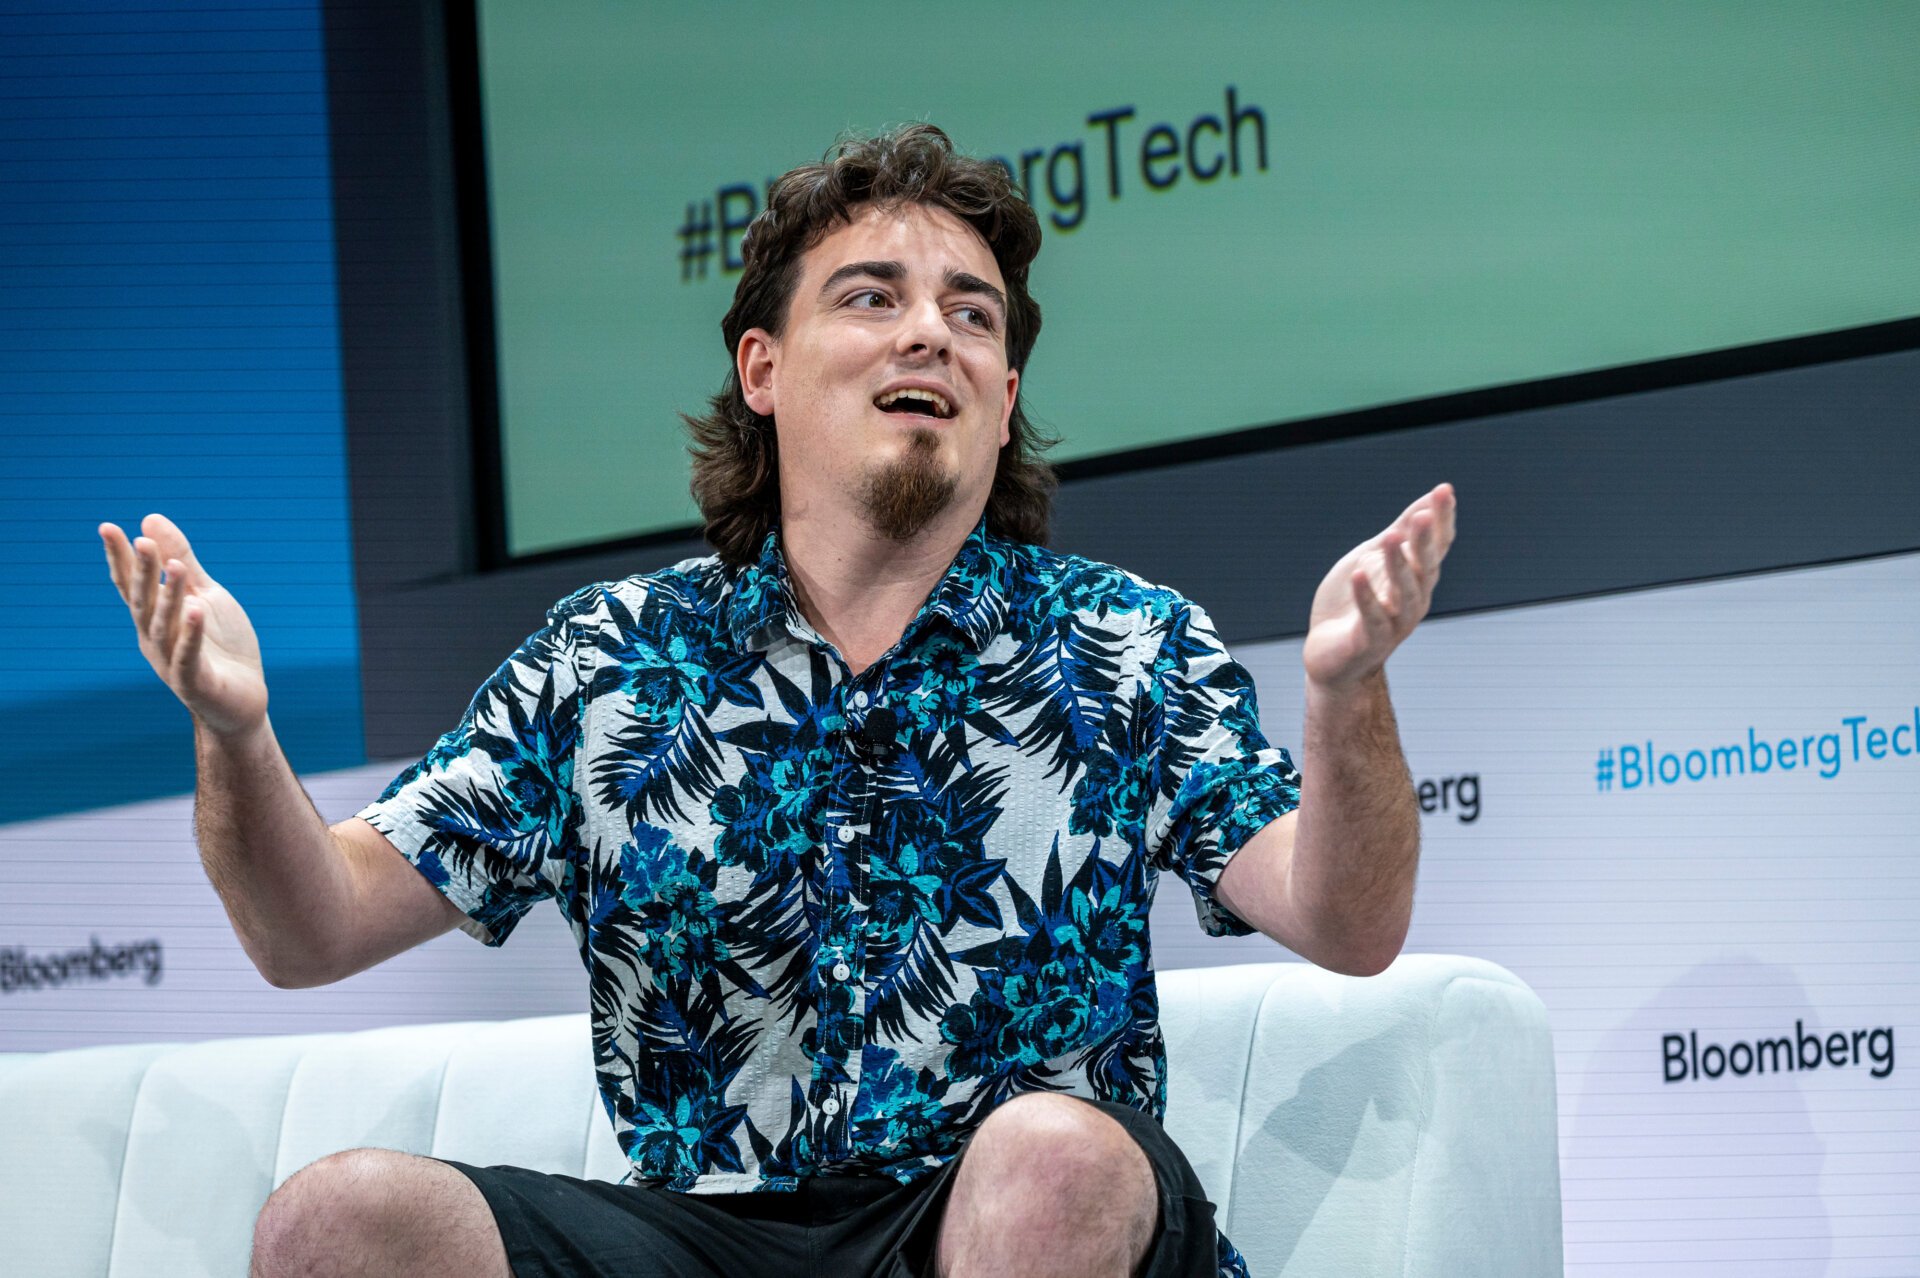 Billionaire Tech Mogul Palmer Luckey Sues After Getting Trapped in His Own Elevator